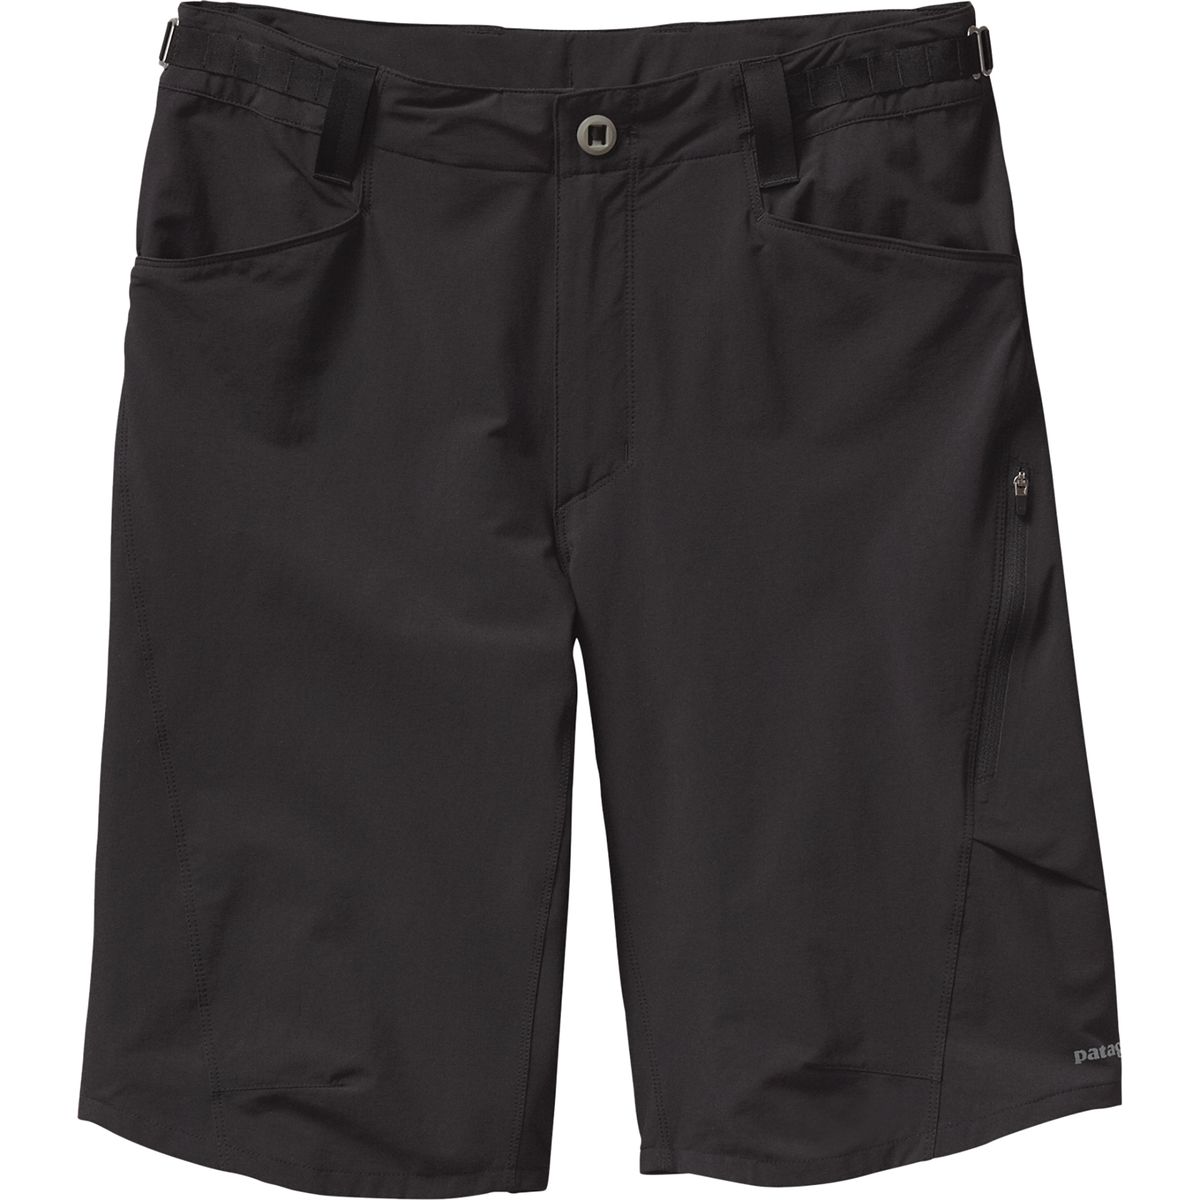 Patagonia Dirt Craft Bike Short - Men's | Competitive Cyclist